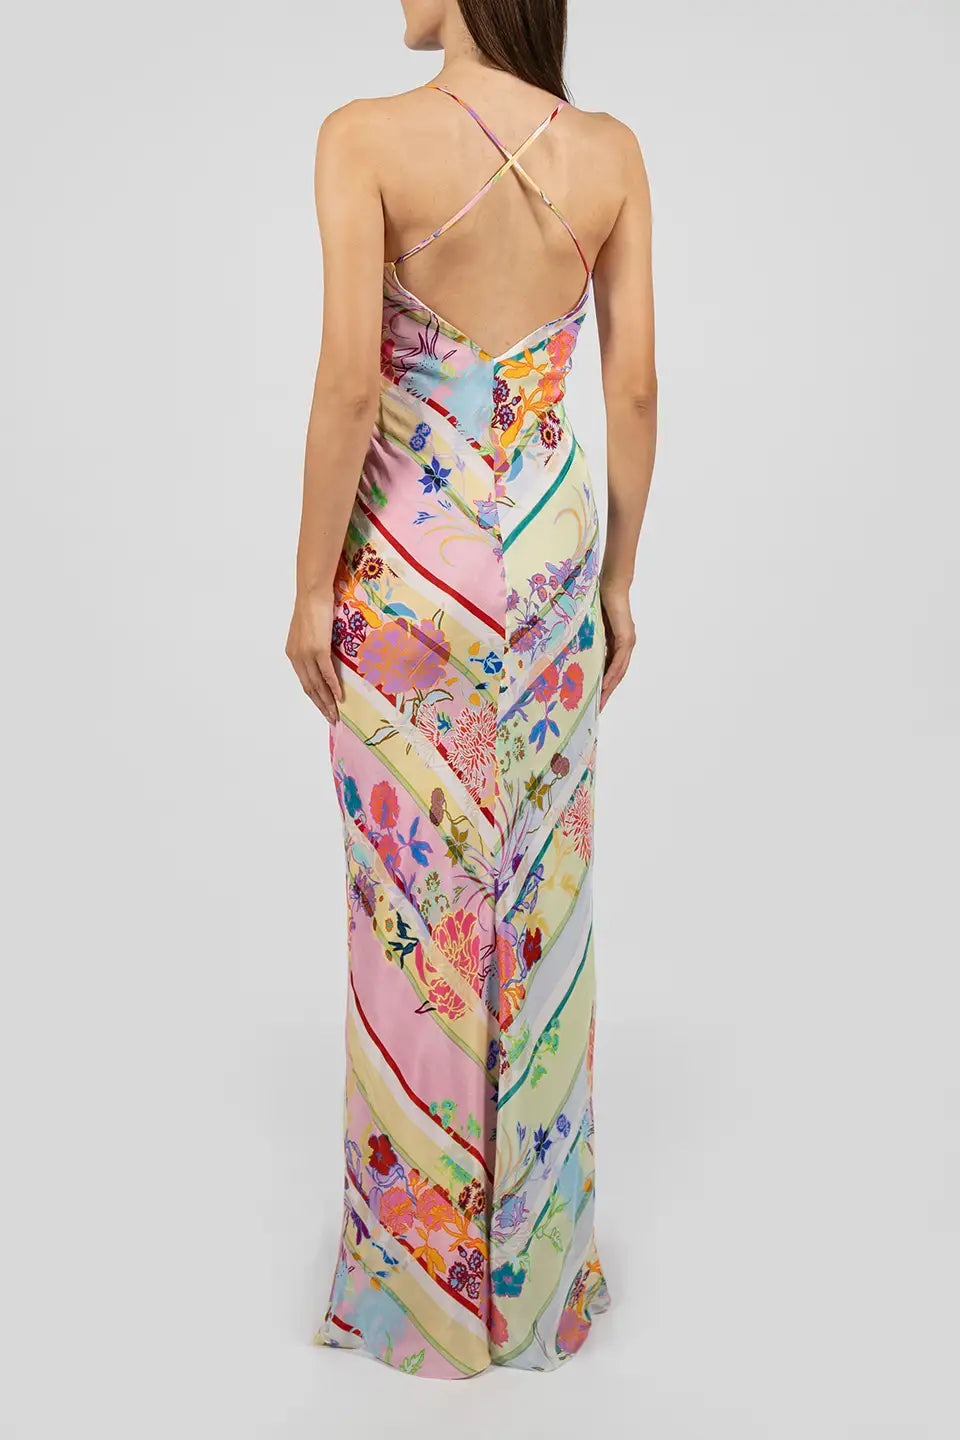 Designer White Maxi dresses, shop online with free delivery in UAE. Product gallery 5